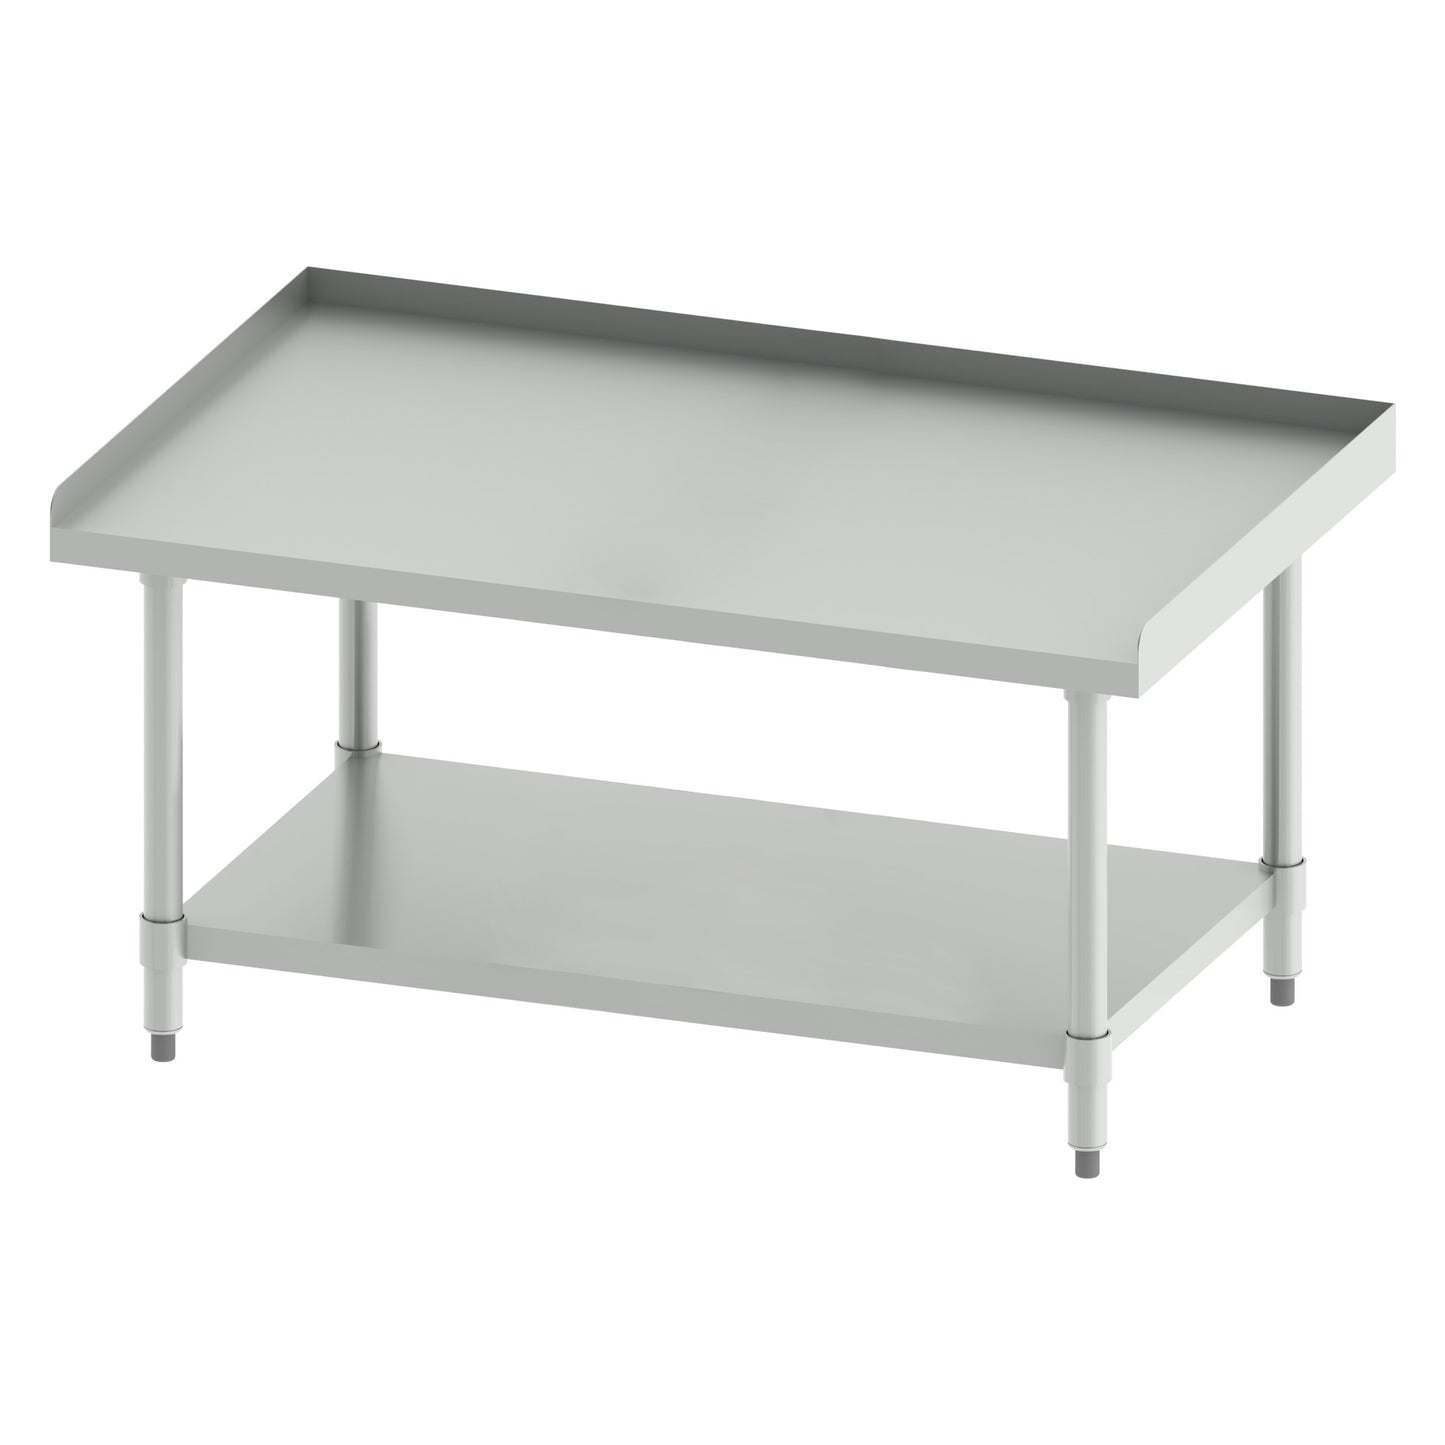 ES-4830 - Stainless Steel Equipment Stand - 48" x 30" x 24"